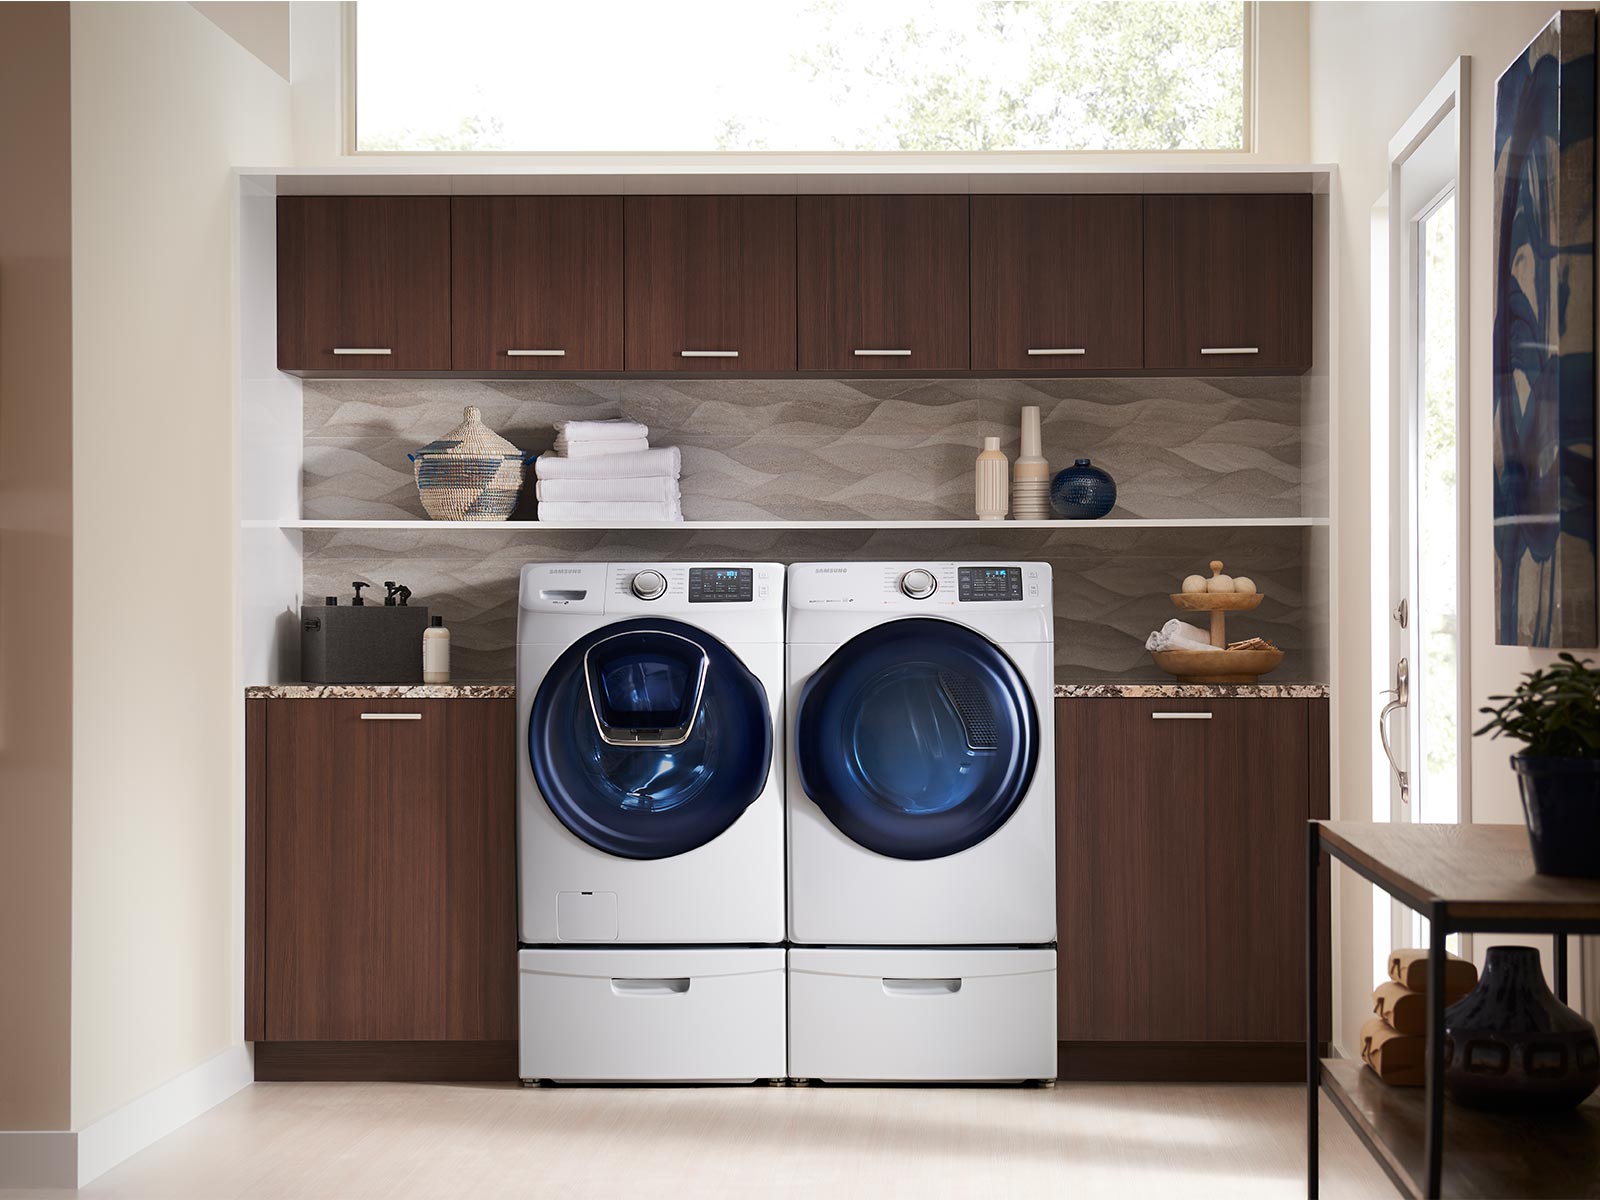 https://image-us.samsung.com/SamsungUS/home/home-appliances/home-appliances-accessories/washers-and-dryers/pd/we357a0w/05_Pedestal_WE357A0W_Lifestyle_Laundry-Room_Pedestal_Add_Wash_White.jpg?$product-details-jpg$